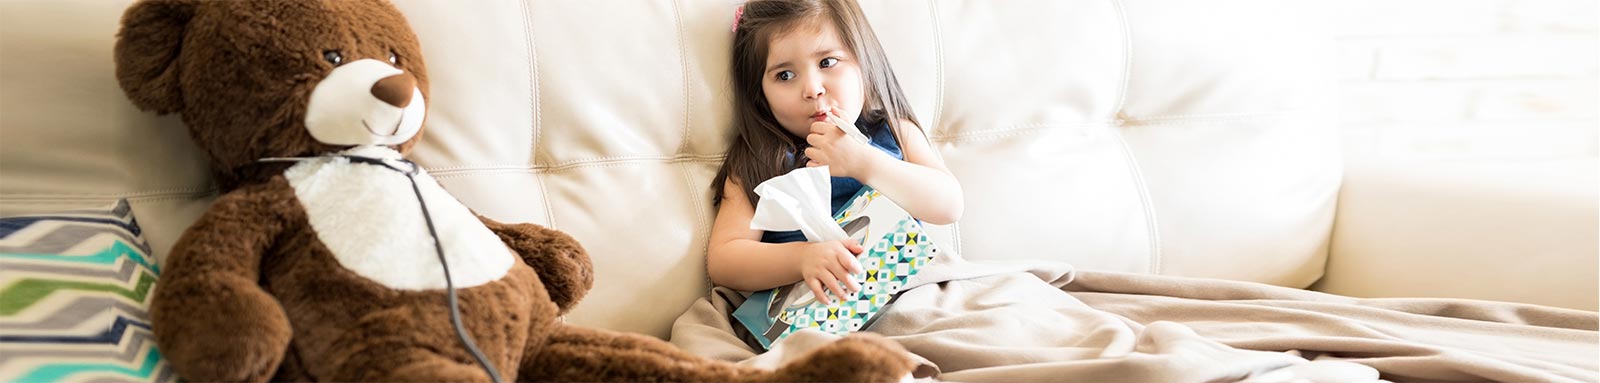 Little girl holding a tissue box sitting next to a teddy bear on a couch